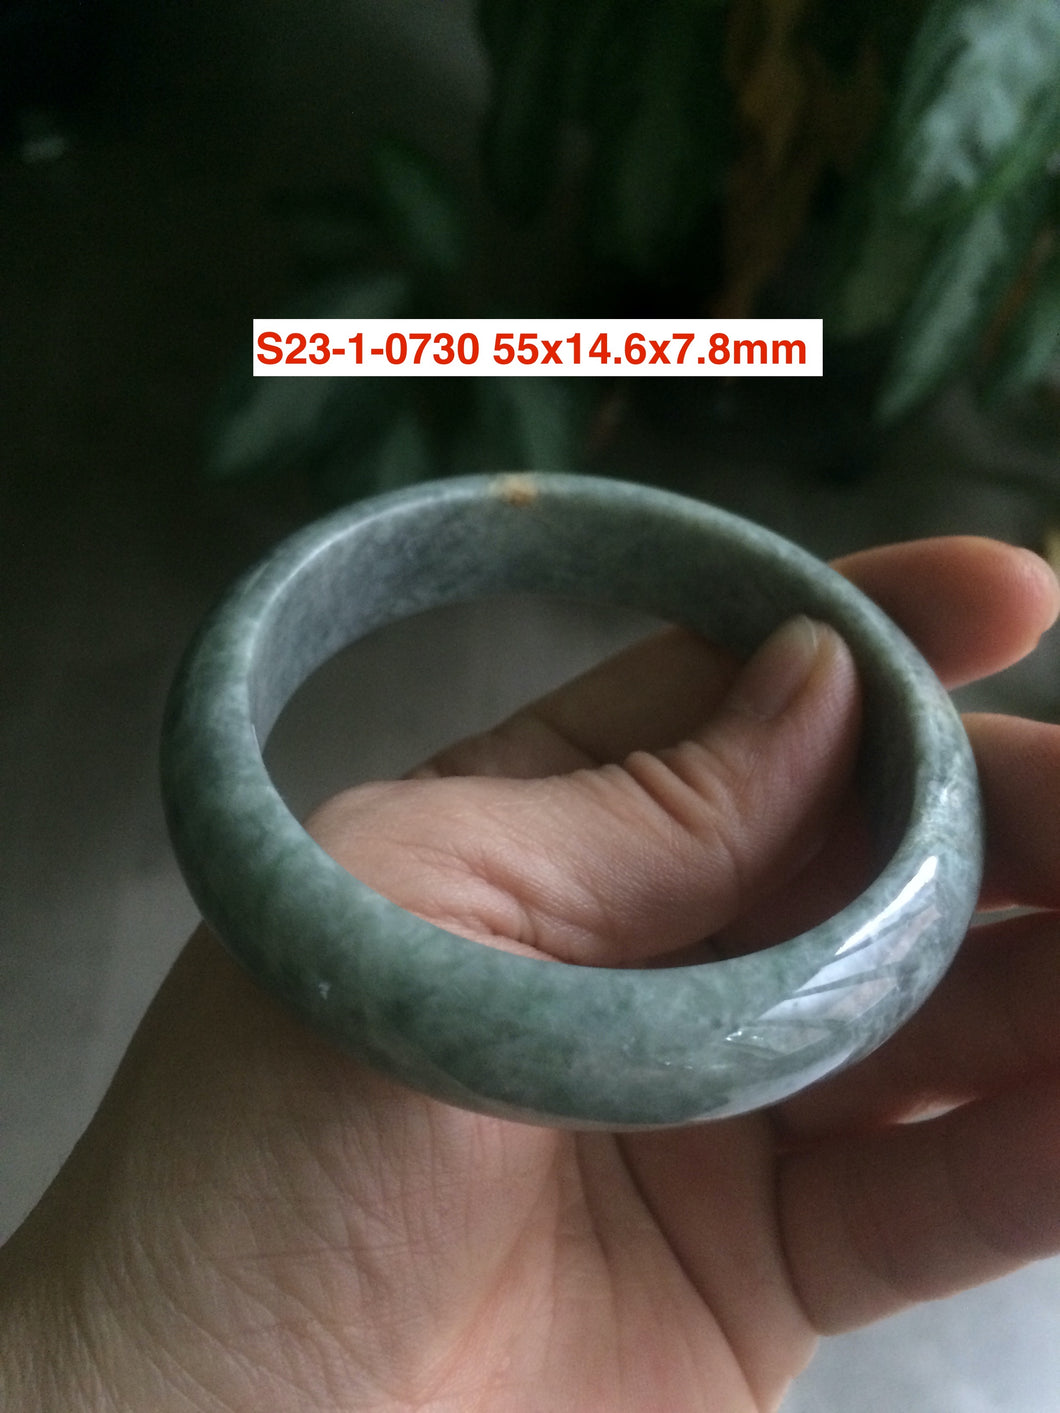 54-55 certified 100% Natural jadeite jade bangle group S23 (Clearance)